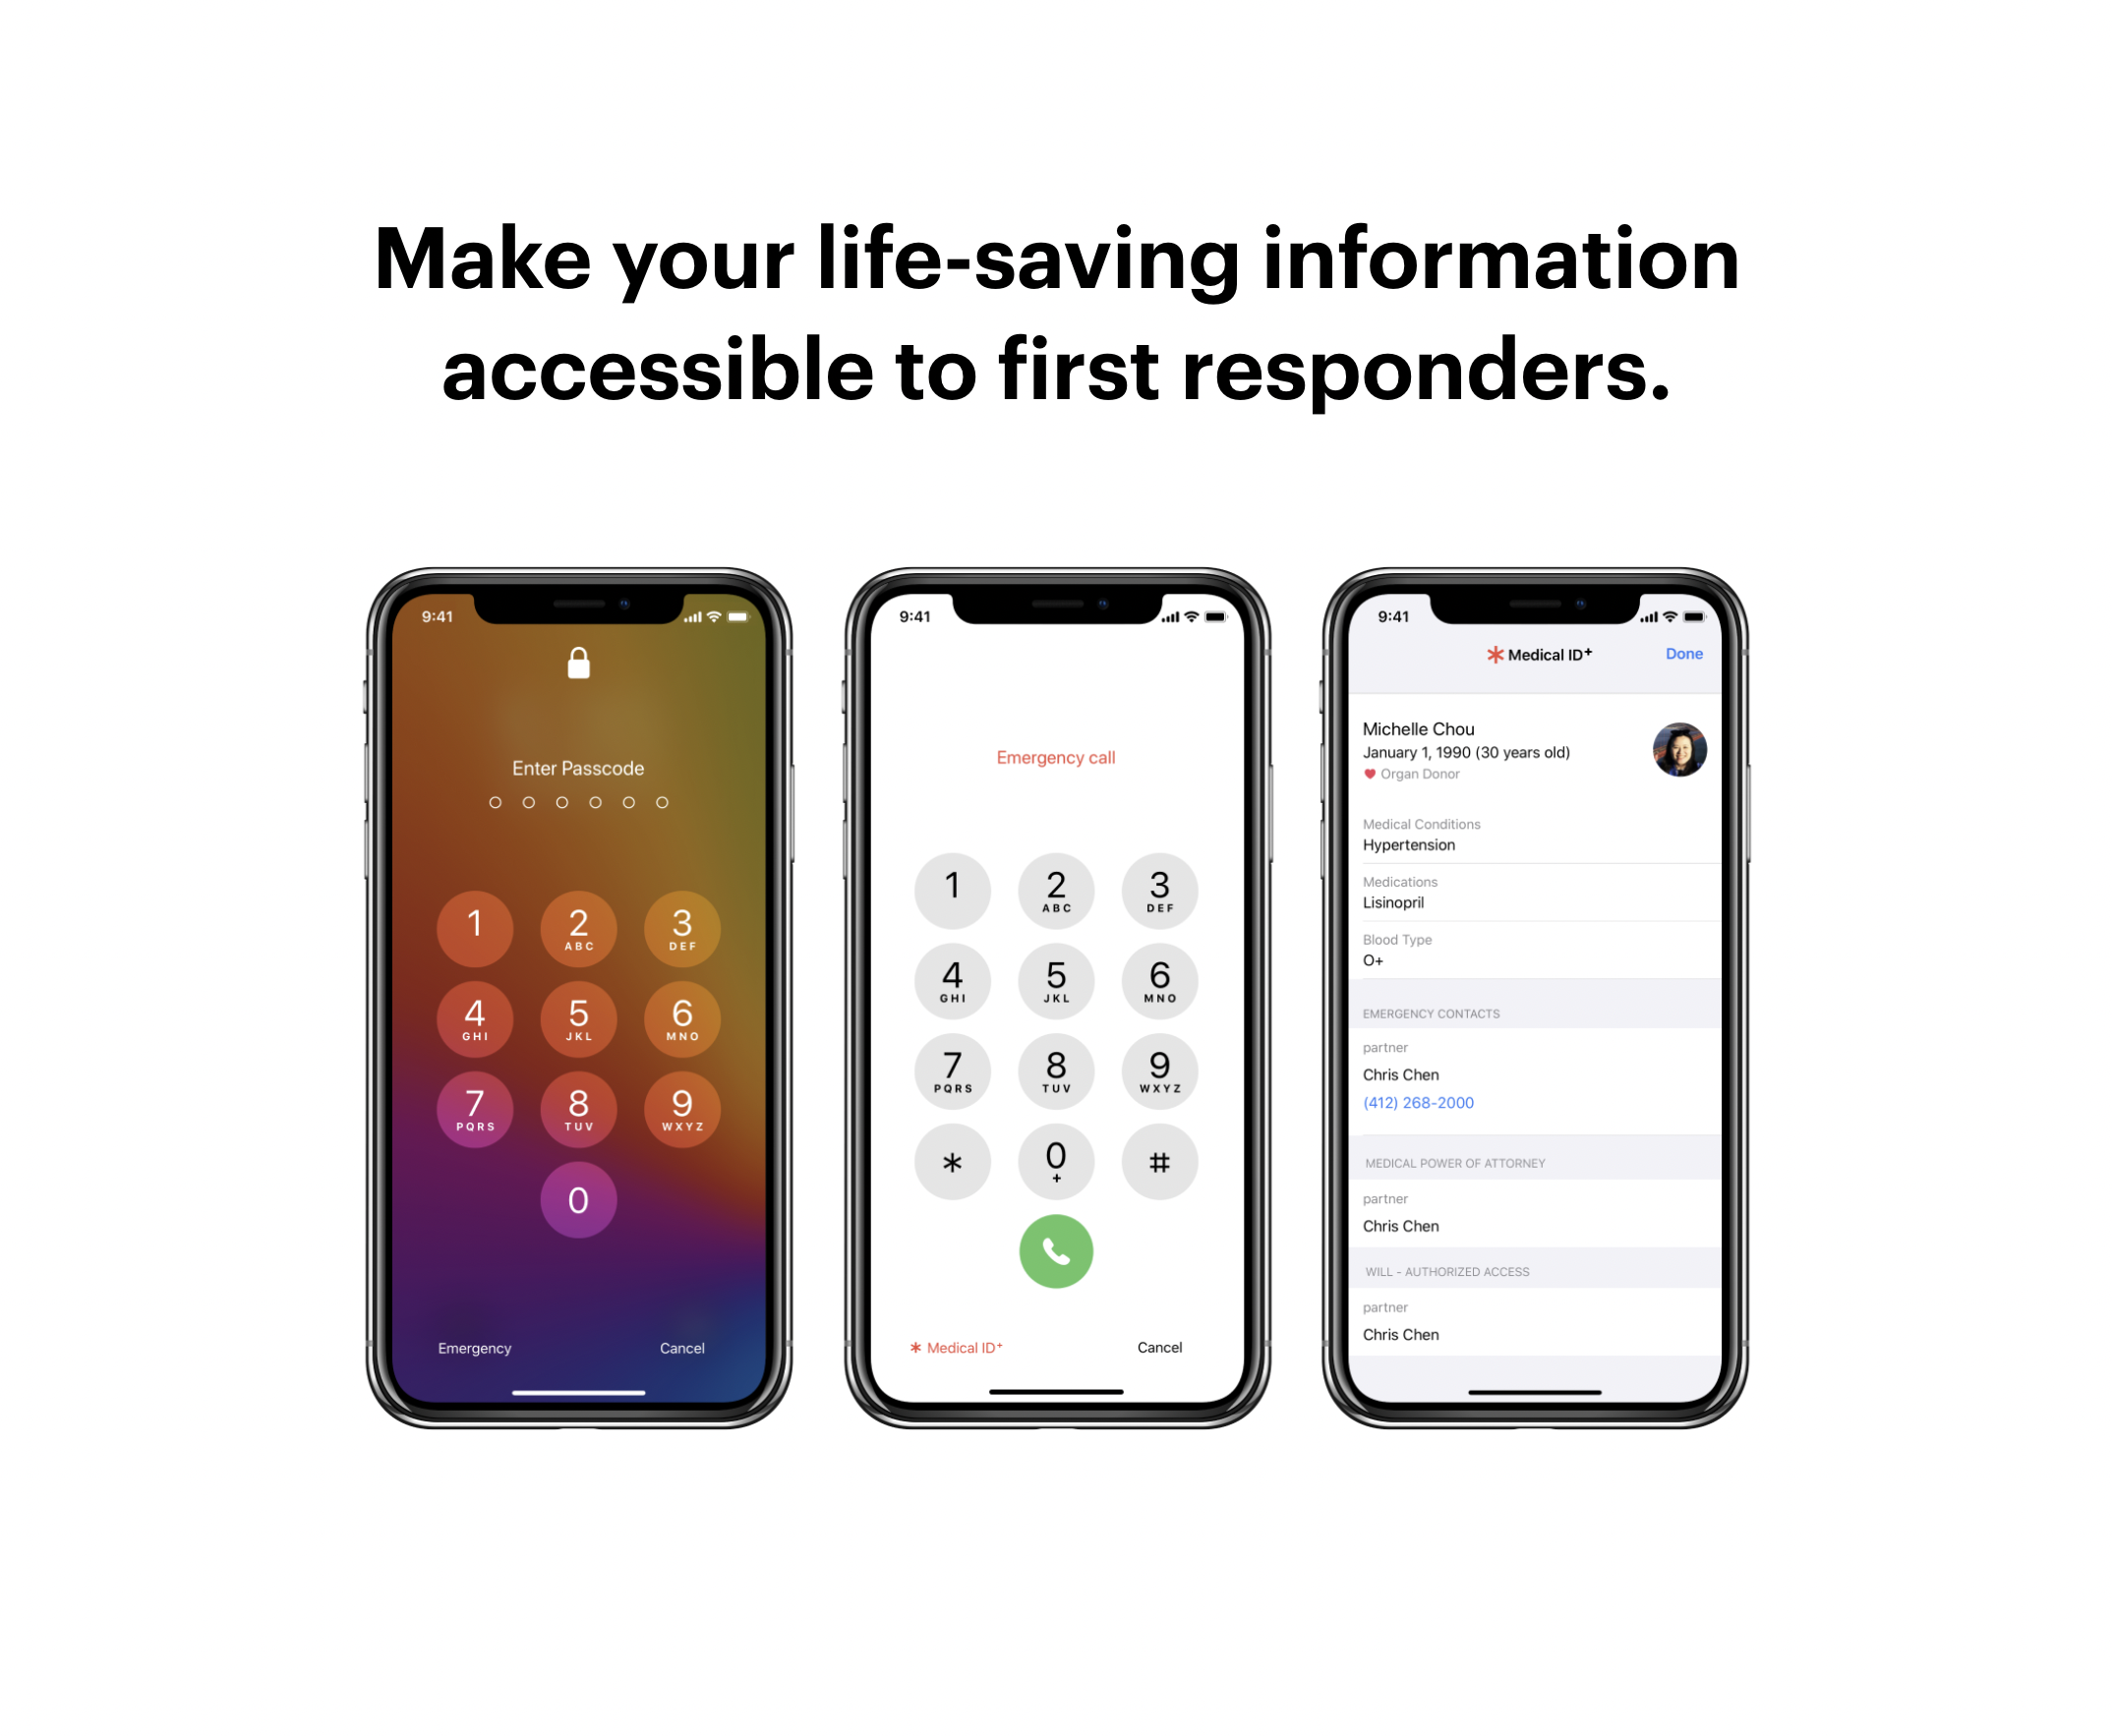 Make your life saving information available for first responders